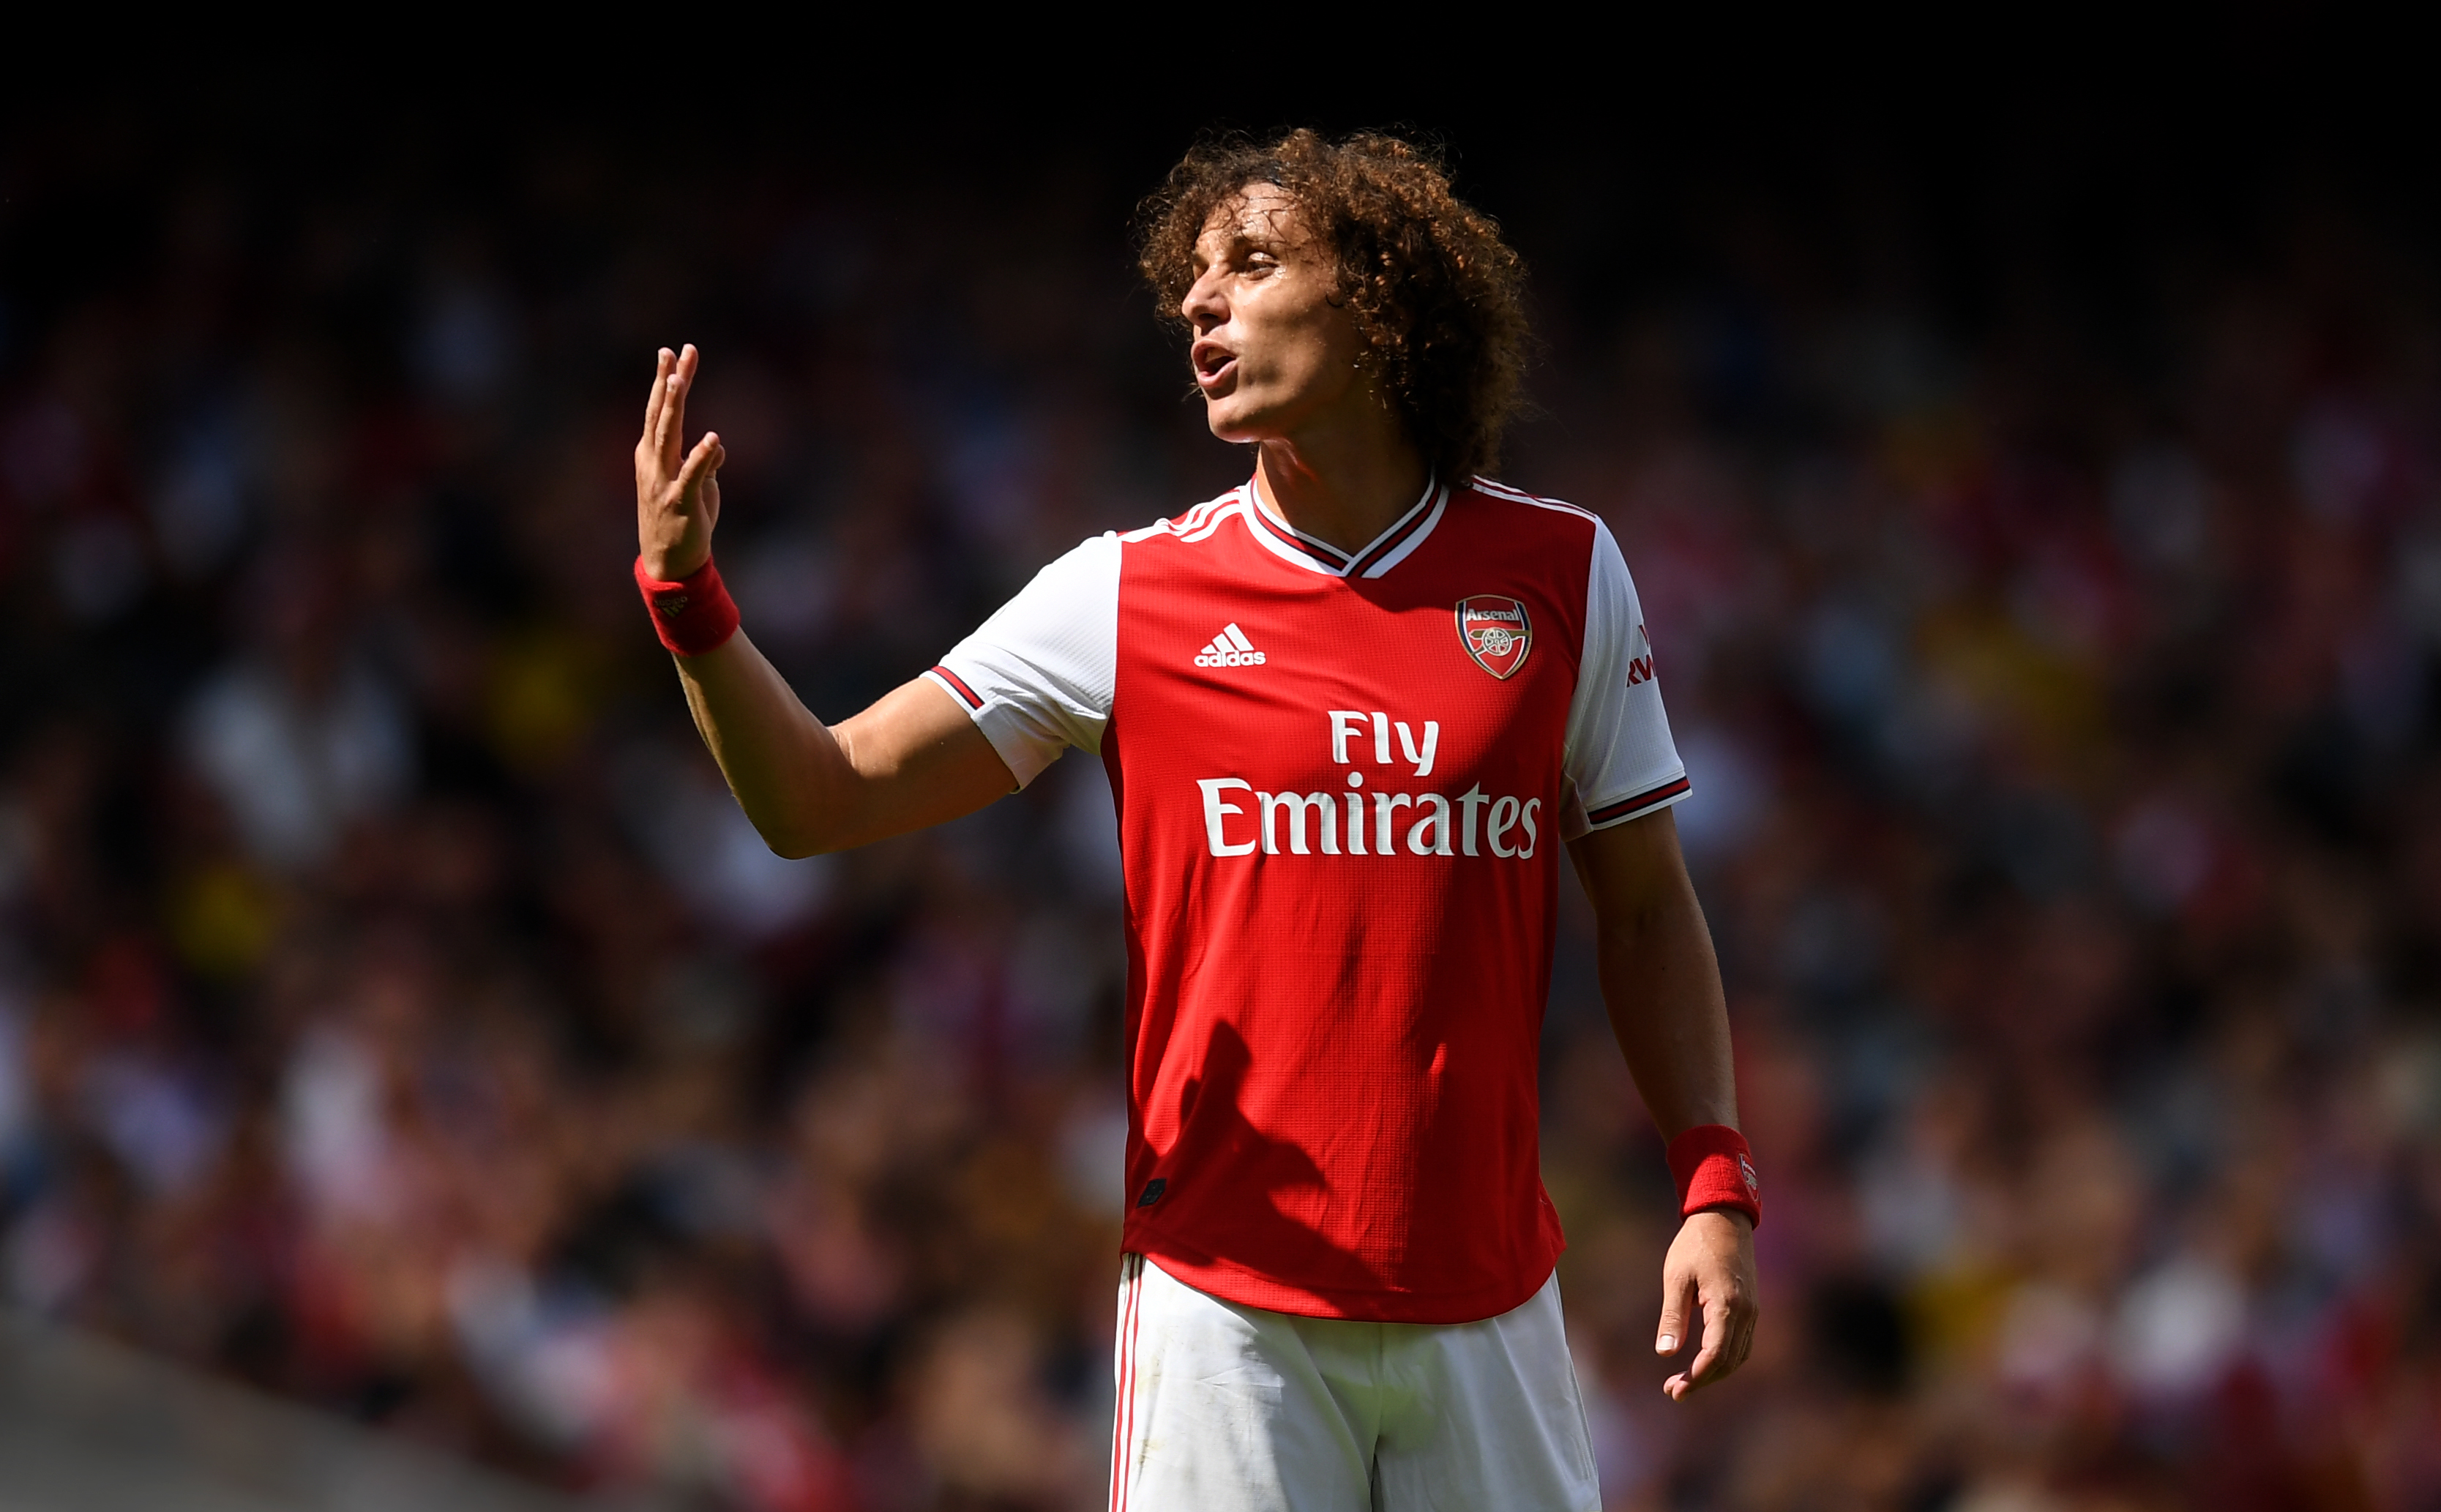 David Luiz will hope to start against West Ham United on Saturday. (Photo by Michael Regan/Getty Images)